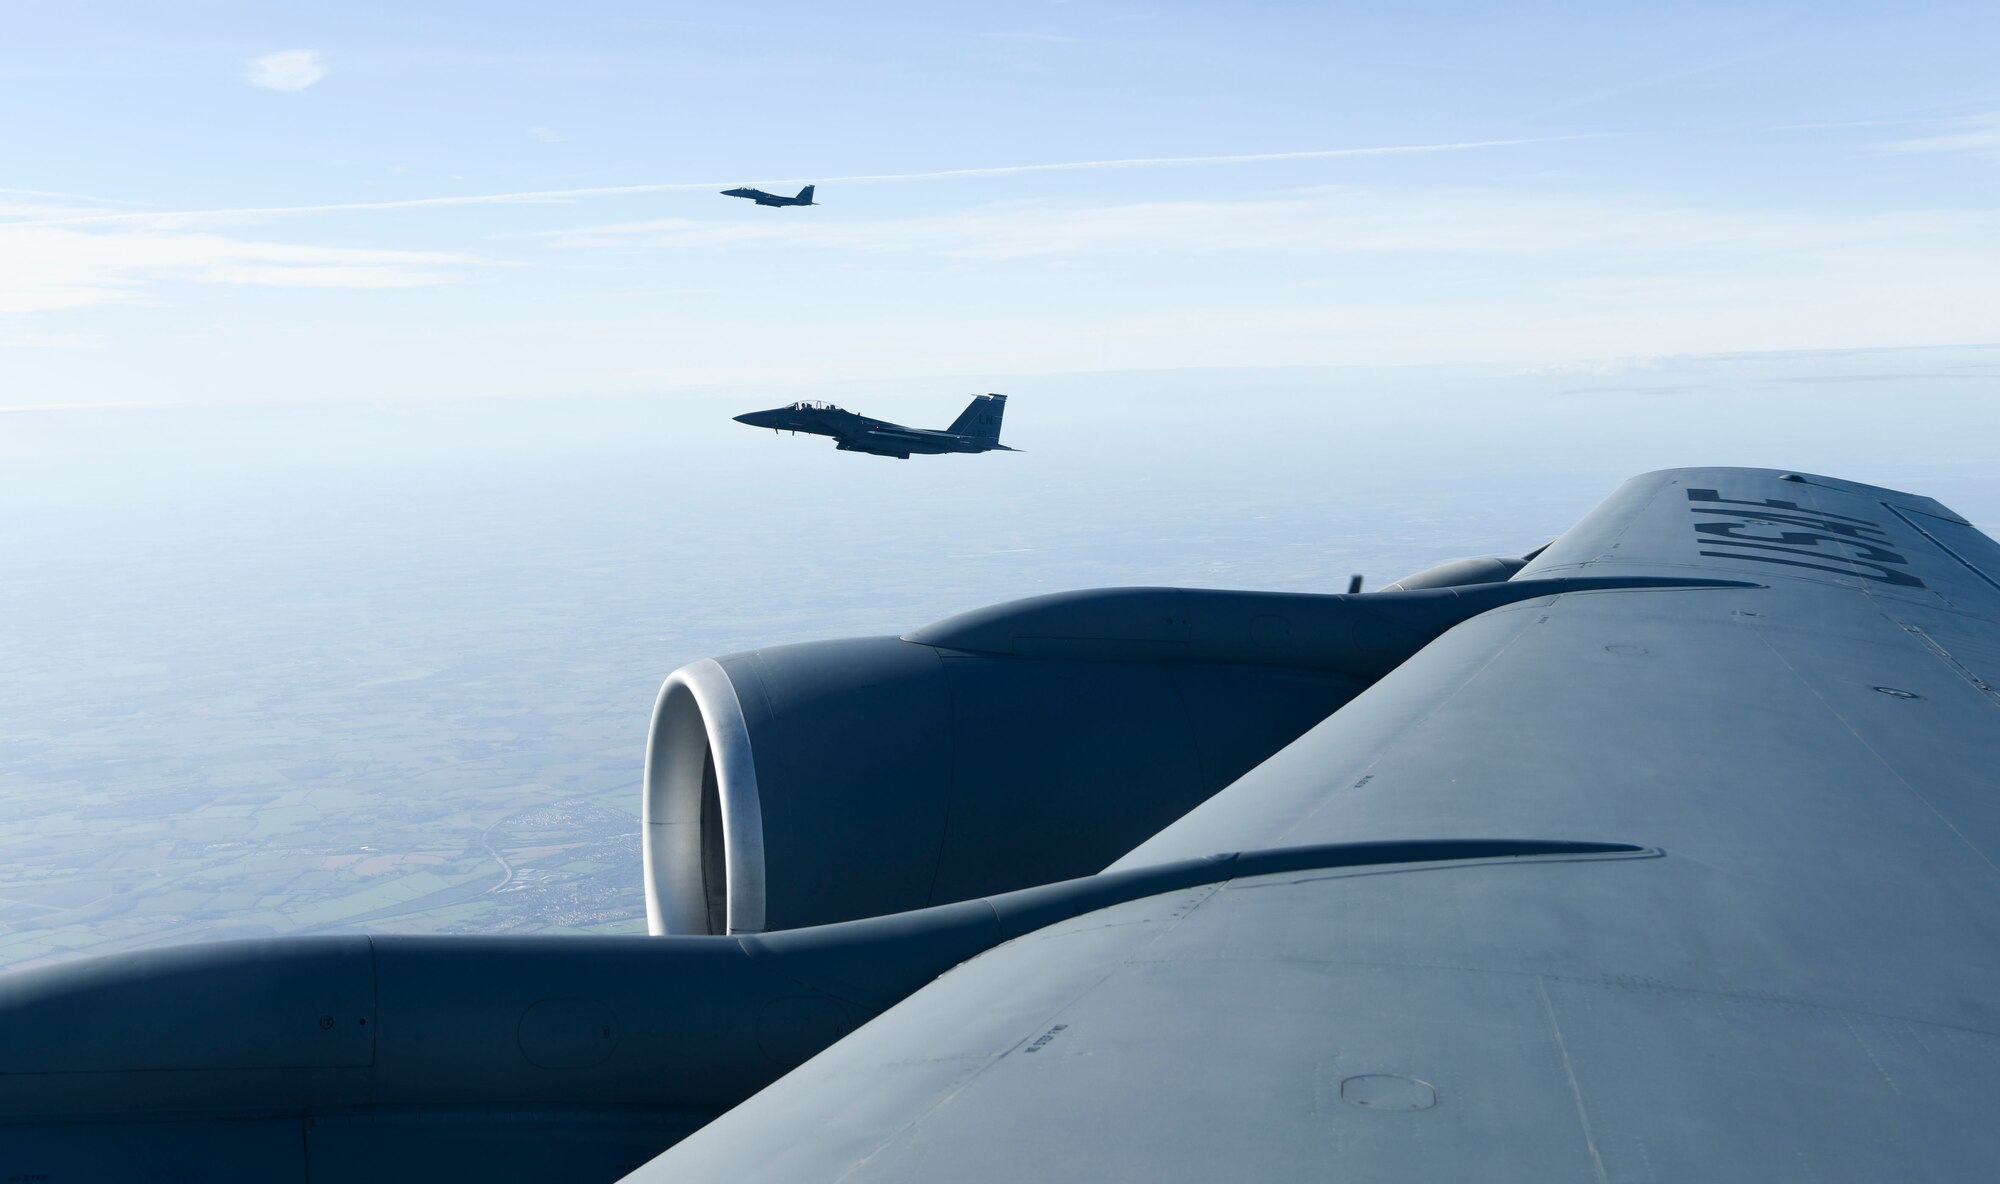 U.S. Air Force F-15E Strike Eagle aircraft assigned to the 48th Fighter Wing, Royal Air Force Lakenheath, England, fly in formation with a KC-135 Stratotanker aircraft assigned to the 100th Air Refueling Wing from RAF Mildenhall, England, Feb. 24, 2021. The flight was in support of Estonian Independence Day, promoting defense cooperation, key to the U.S-Estonia relationship. (U.S. Air Force Photo by Airman 1st Class David C Busby)